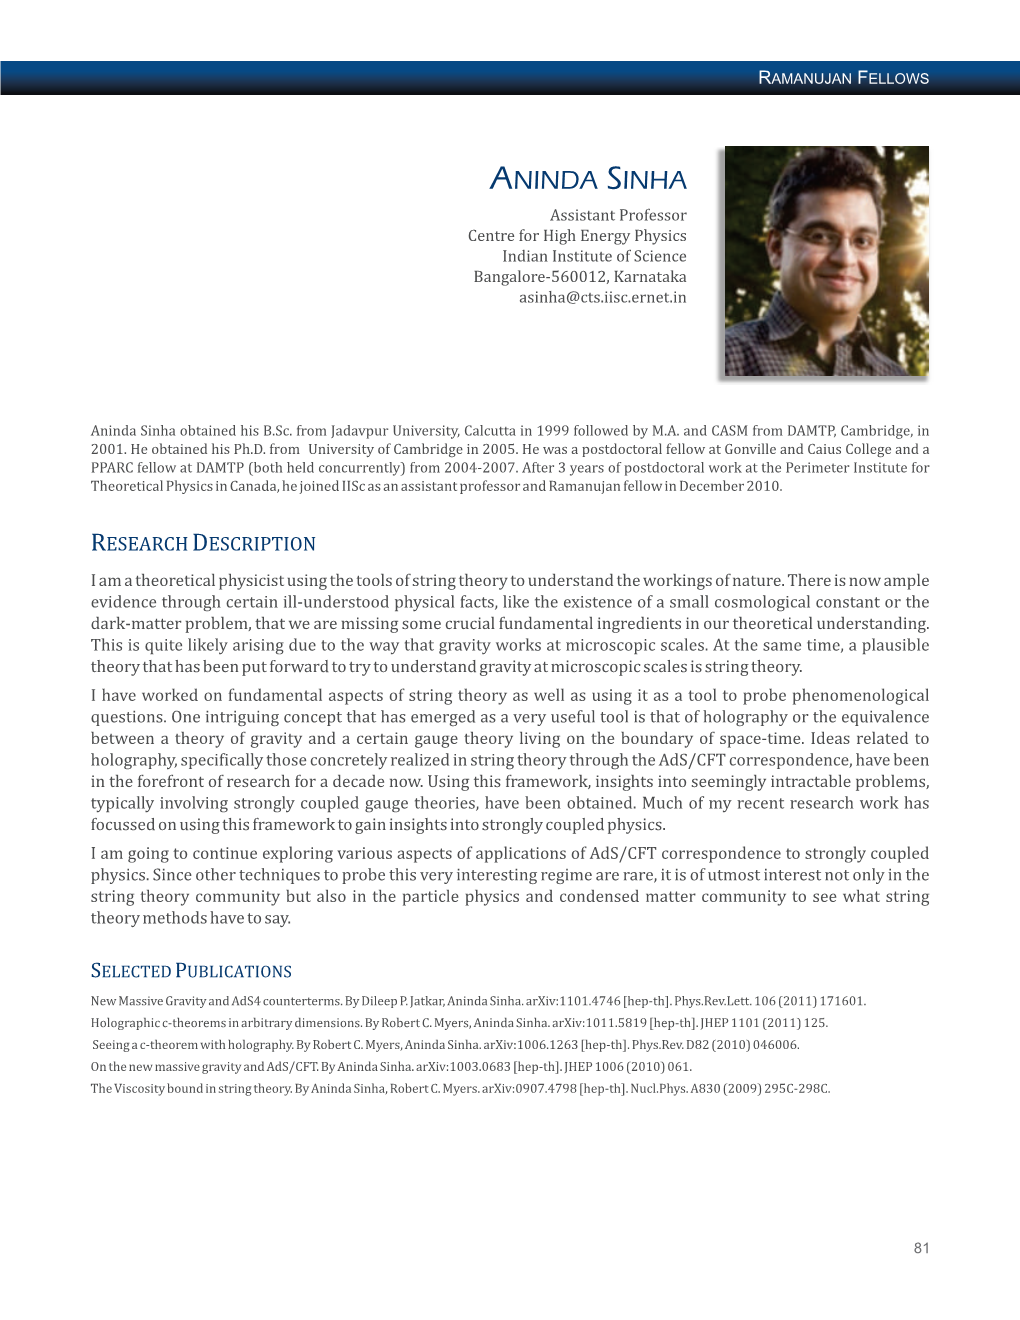 ANINDA SINHA Assistant Professor Centre for High Energy Physics Indian Institute of Science Bangalore-560012, Karnataka Asinha@Cts.Iisc.Ernet.In